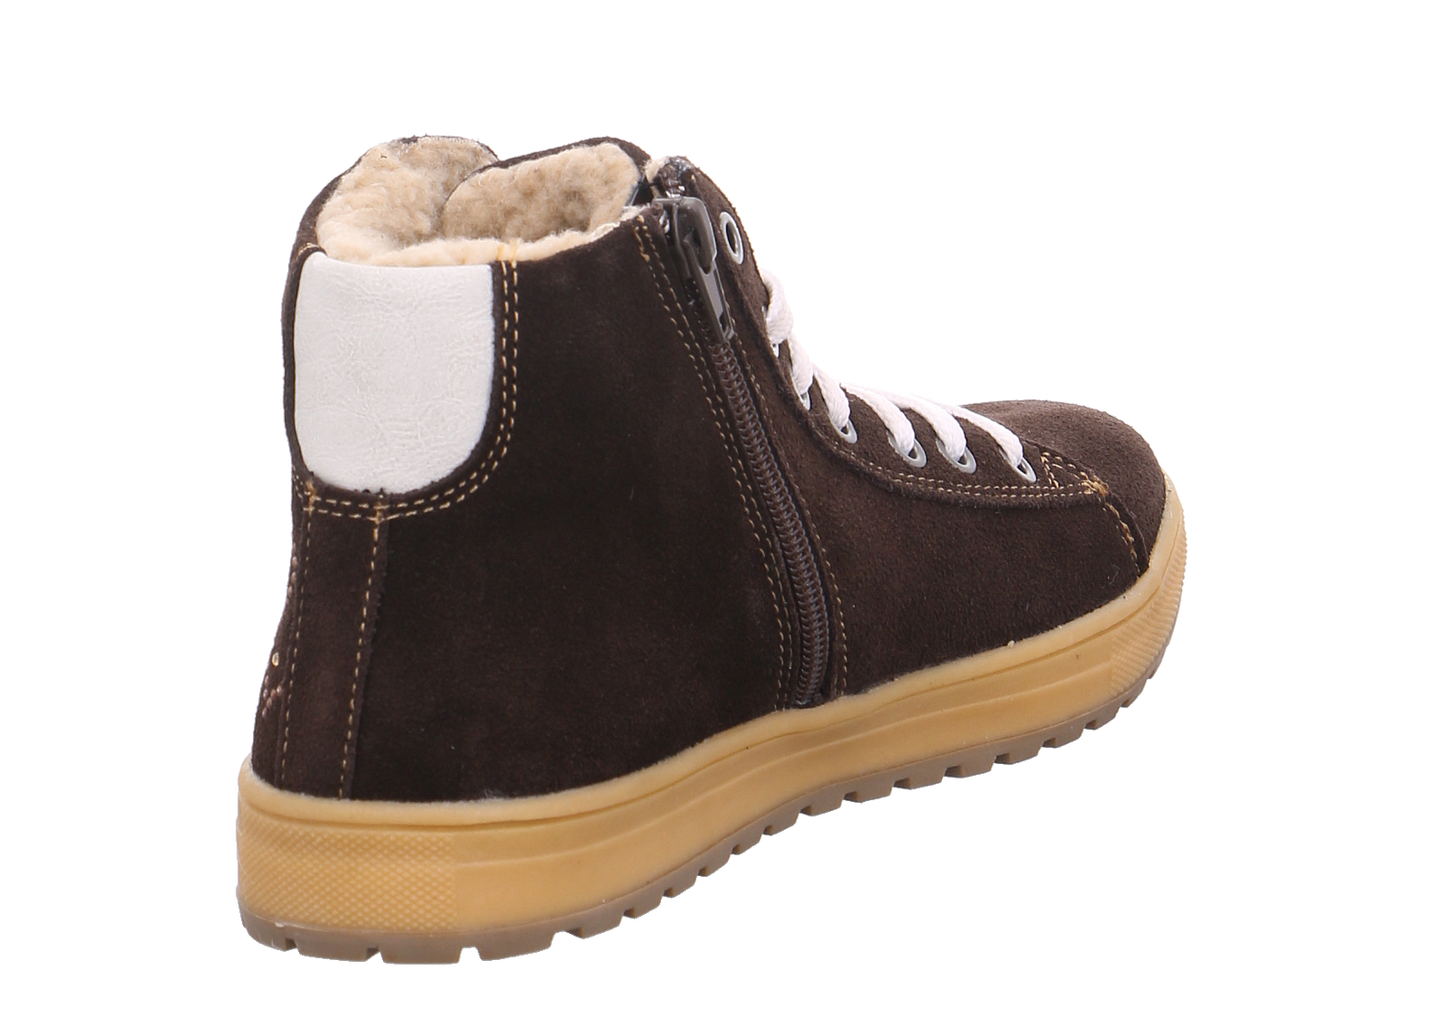 Its For You Stiefel dunkel-braun